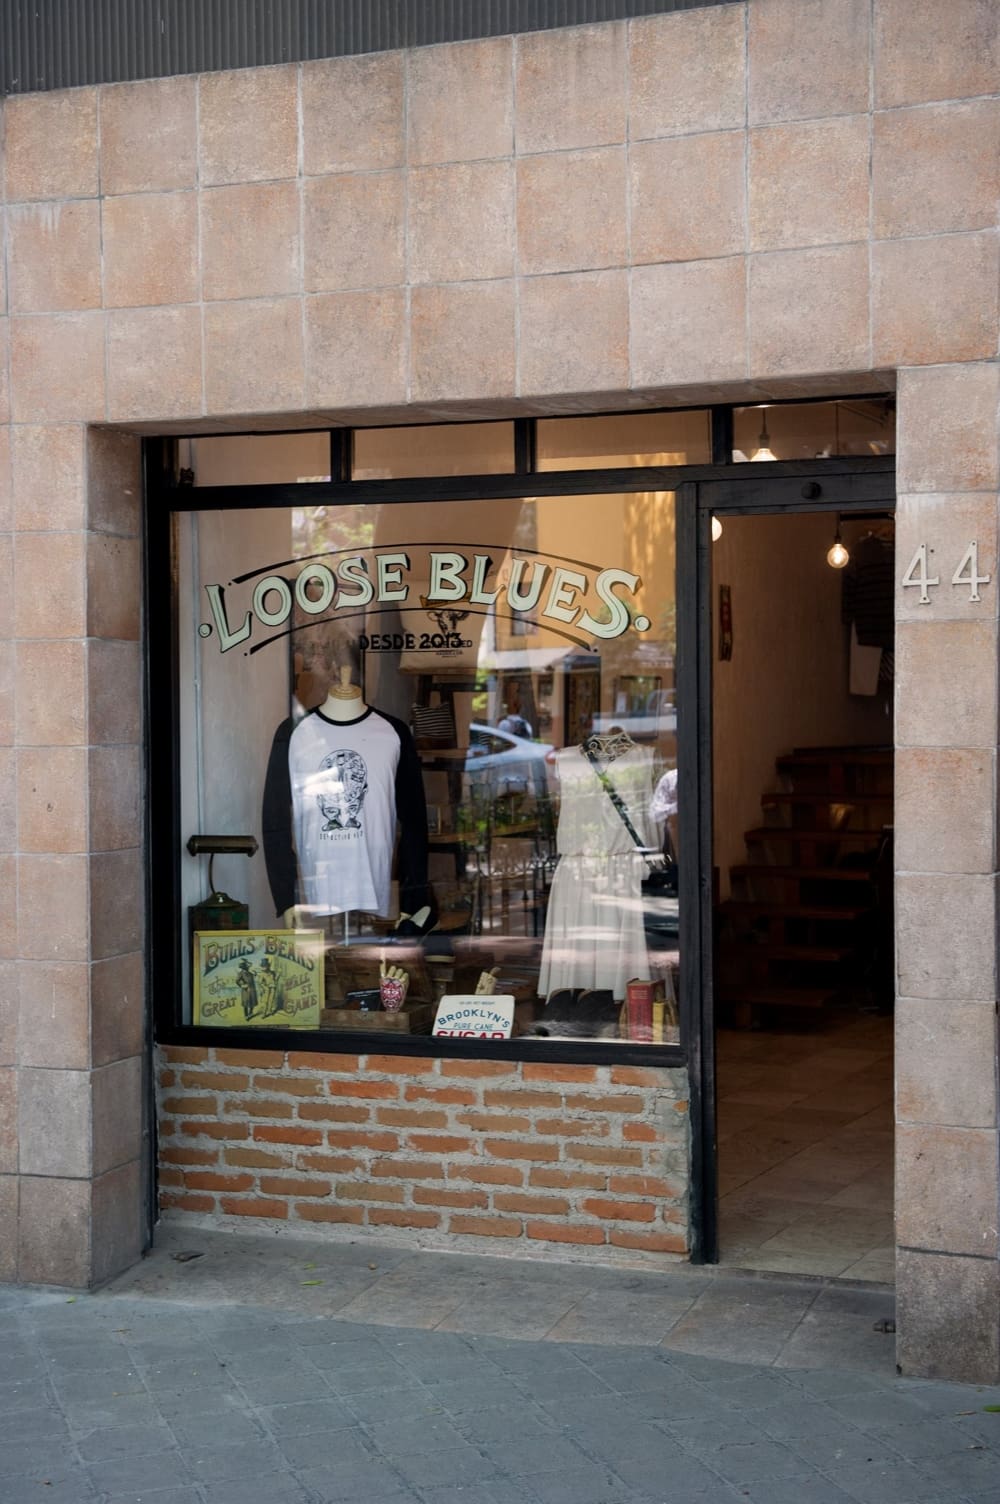 The best vintage shops in Mexico City | The exterior of Loose Blues